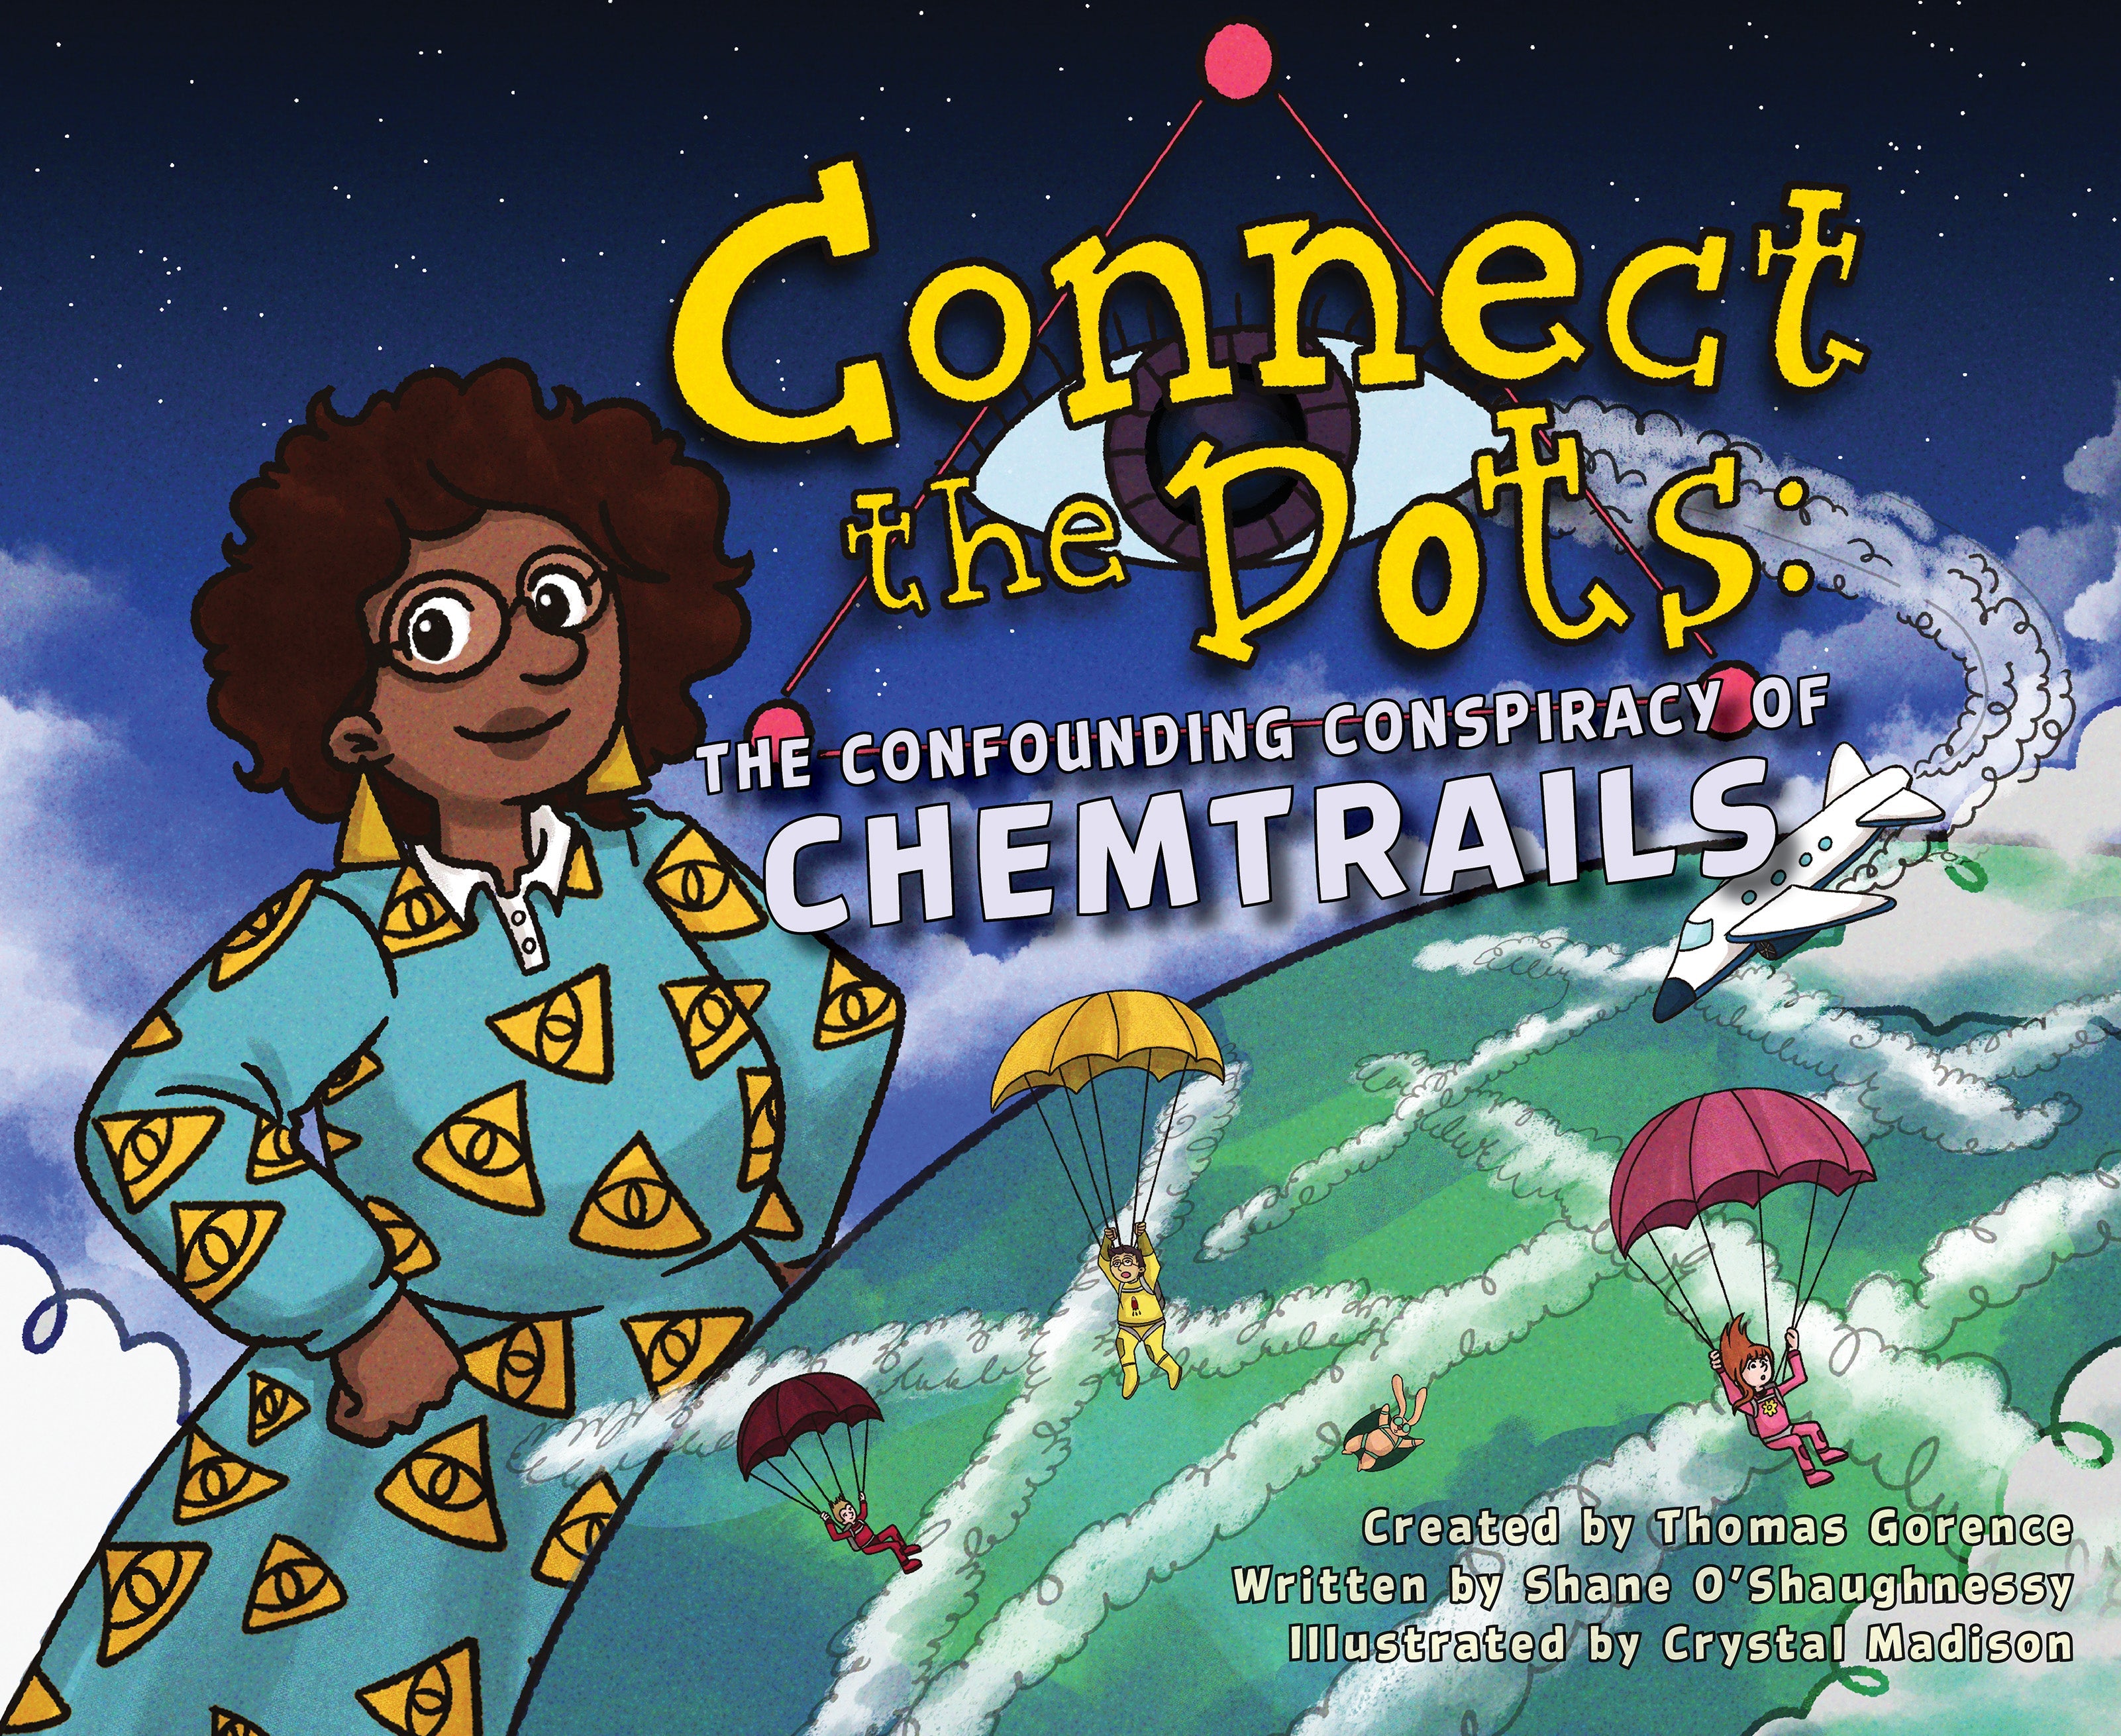 connect-the-dots-1-the-confounding-conspiracy-of-chemtrails-digital